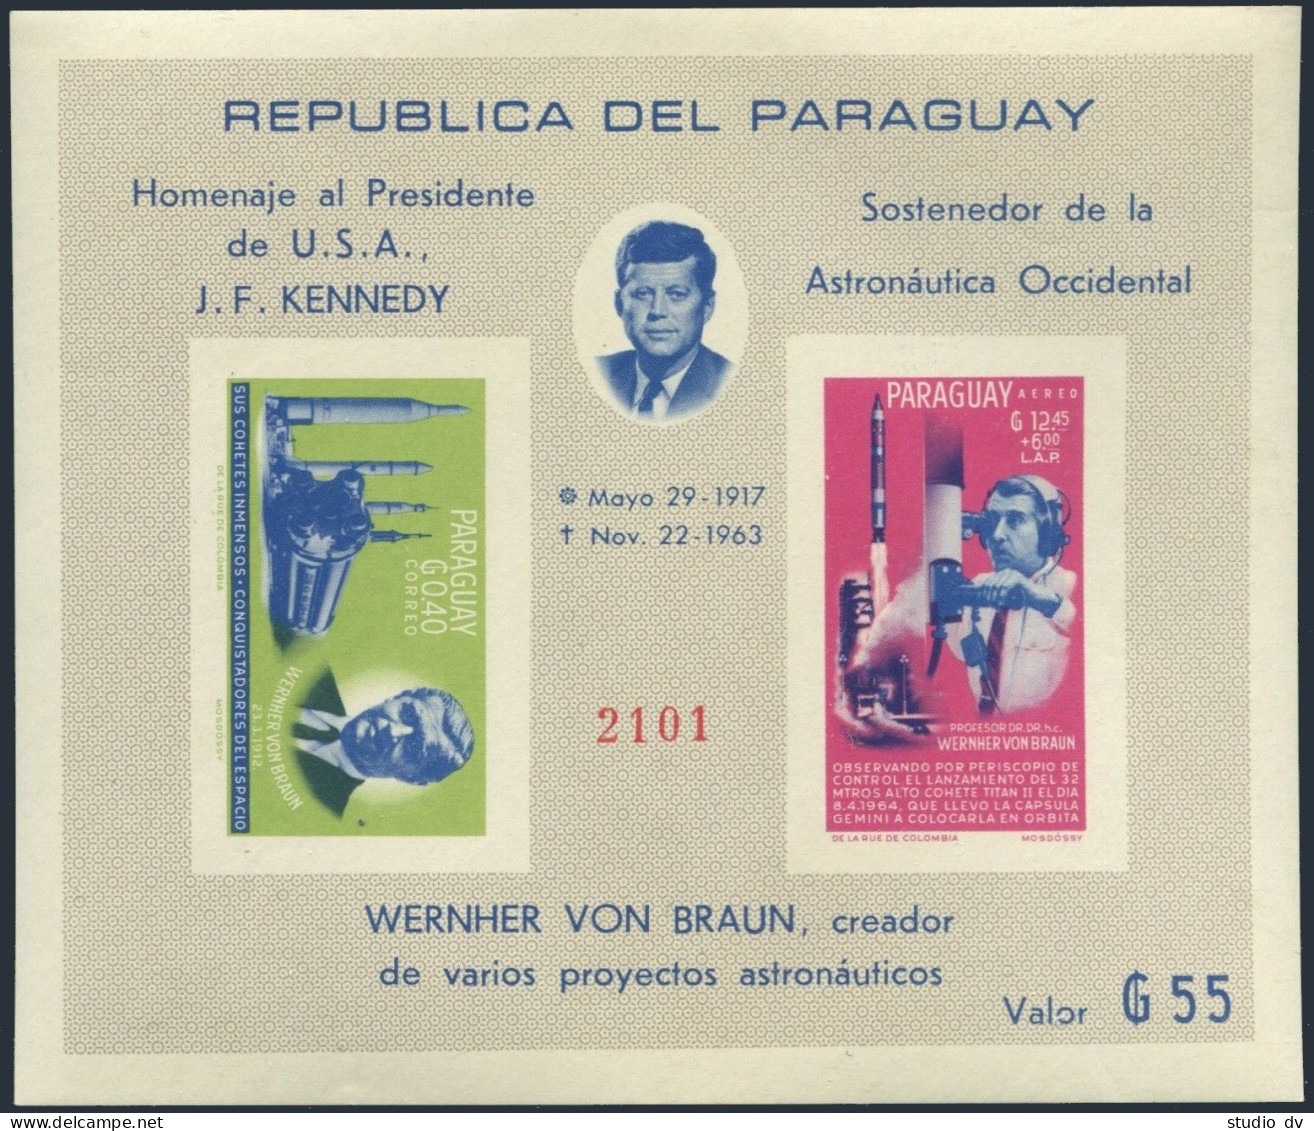 Paraguay 841a Perf,imperf,MNH.Mi Bl.60-61. Space Achievements,1964.Braun,Kennedy - Paraguay